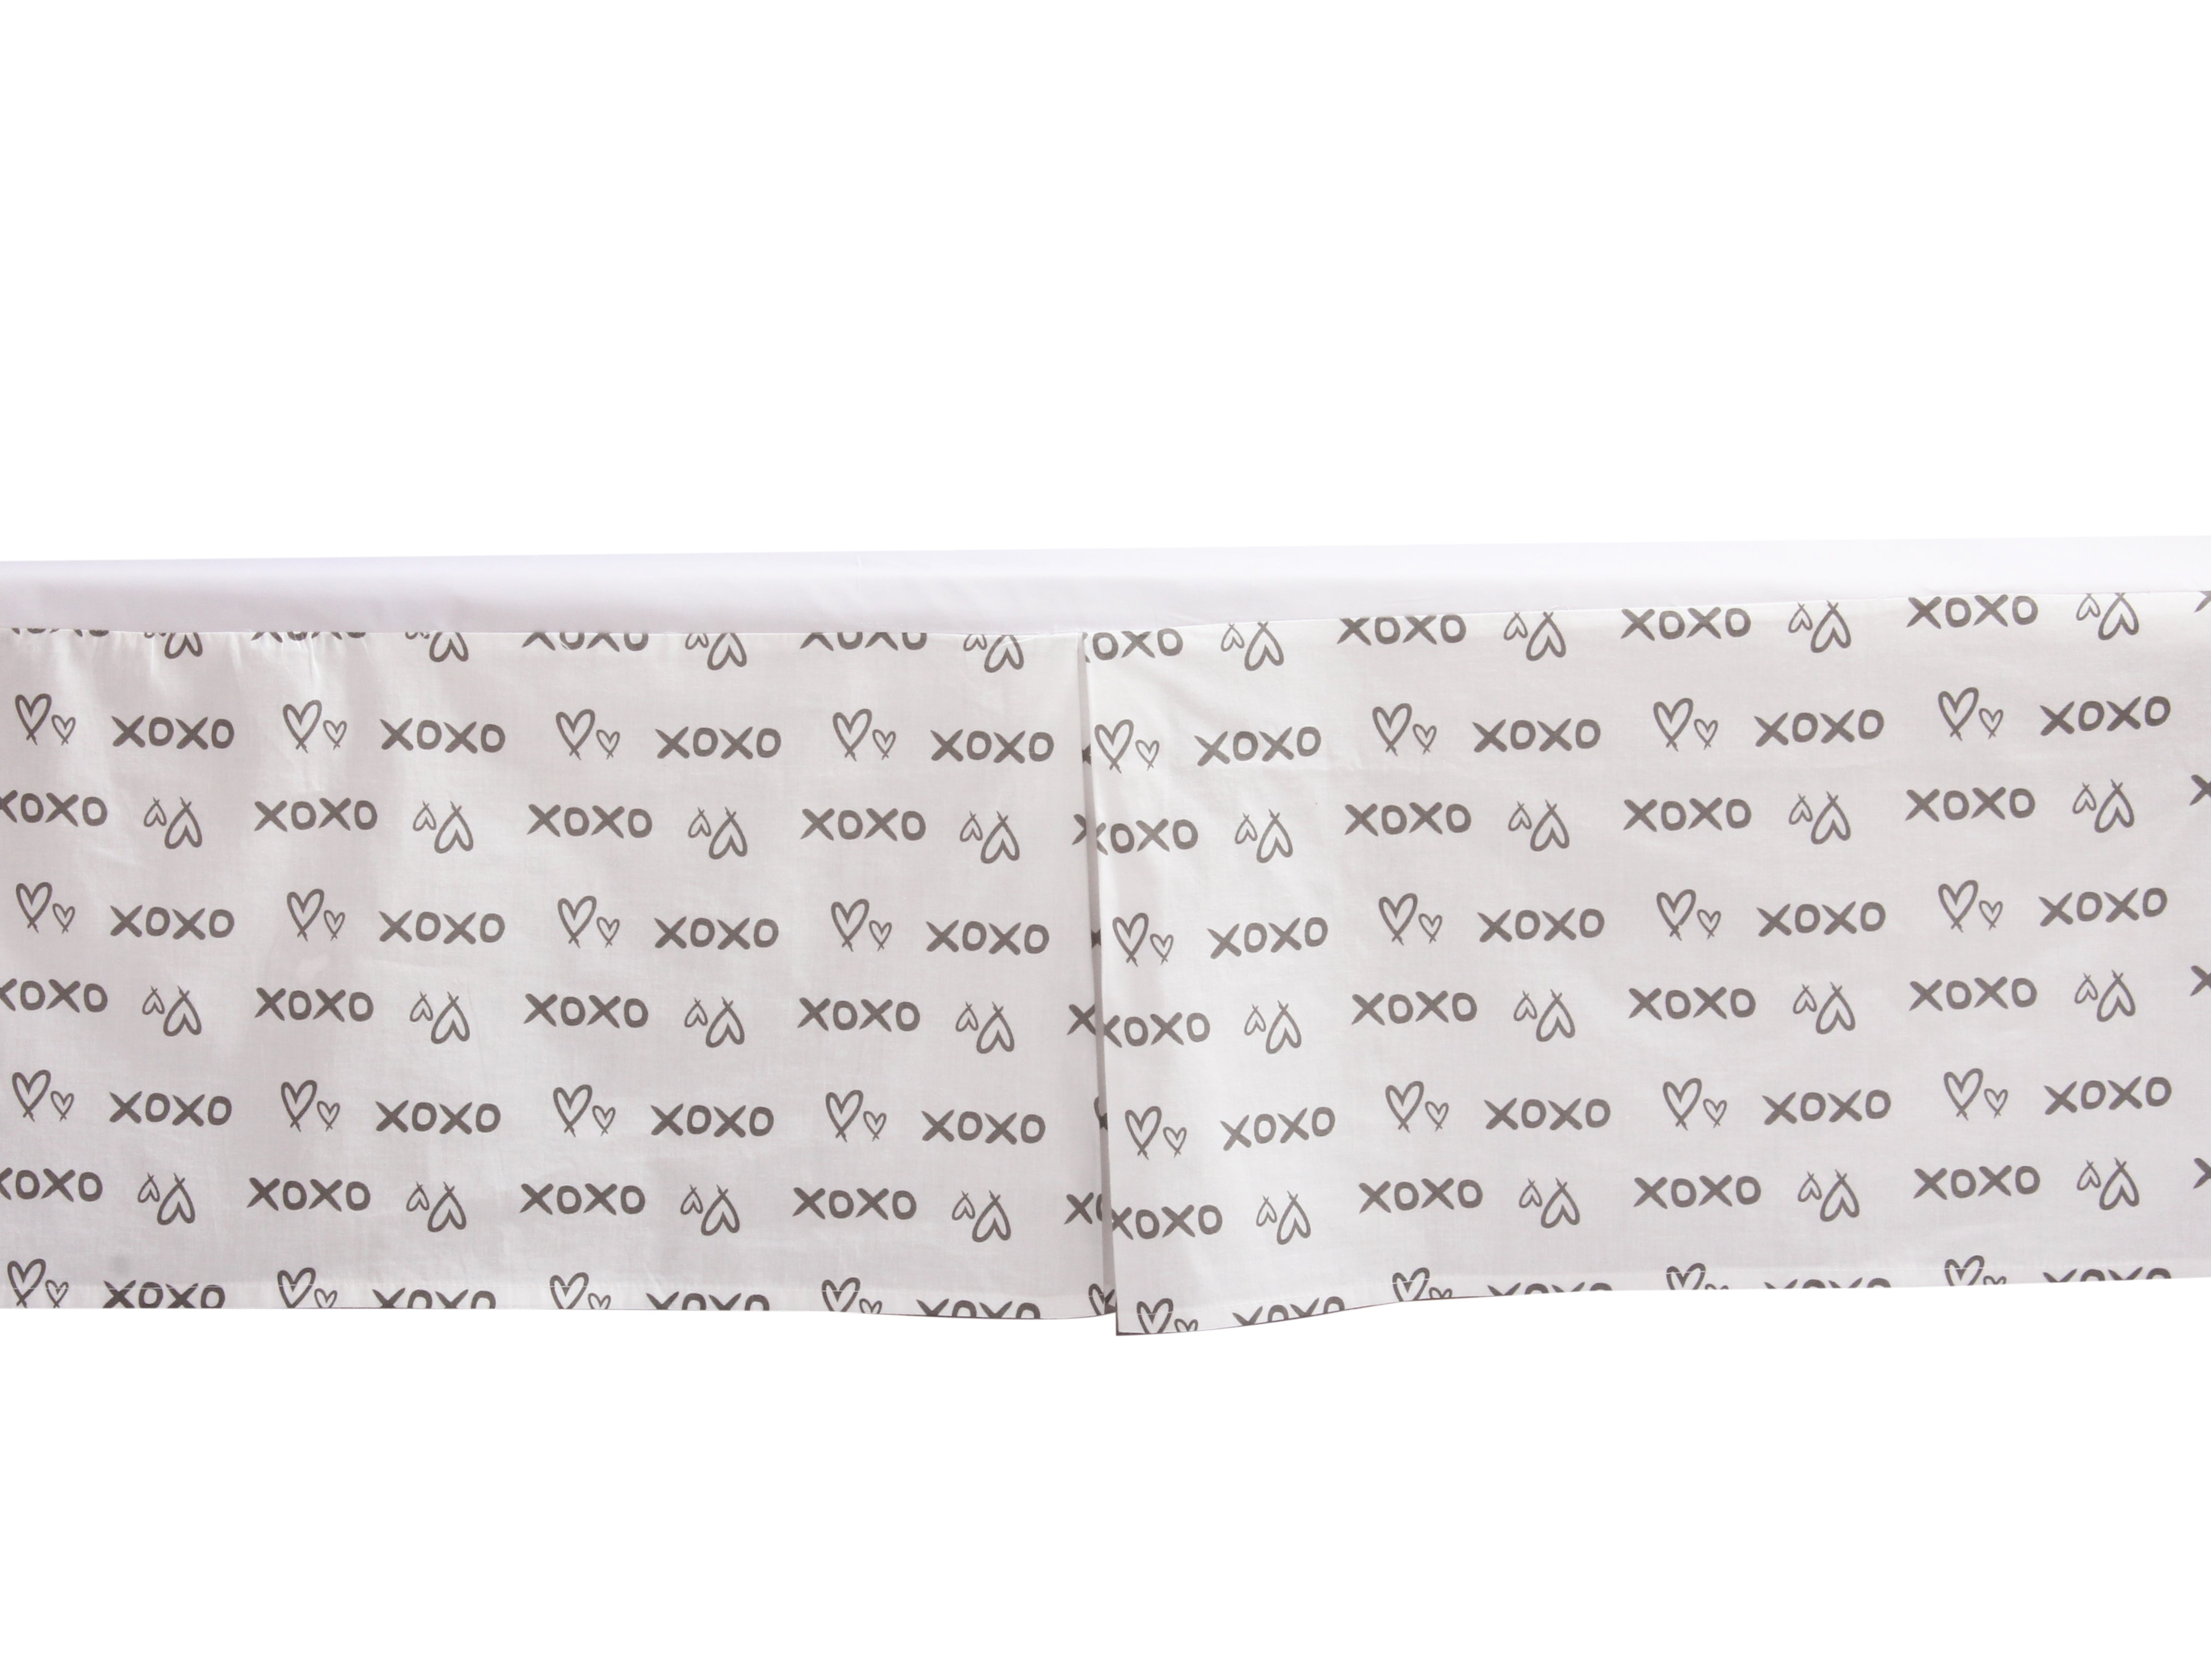 Bacati - Multiple Options of Crib or Toddler Bed Skirt or Dust Ruffle 100% Cotton Percale, Aztec Love Grey